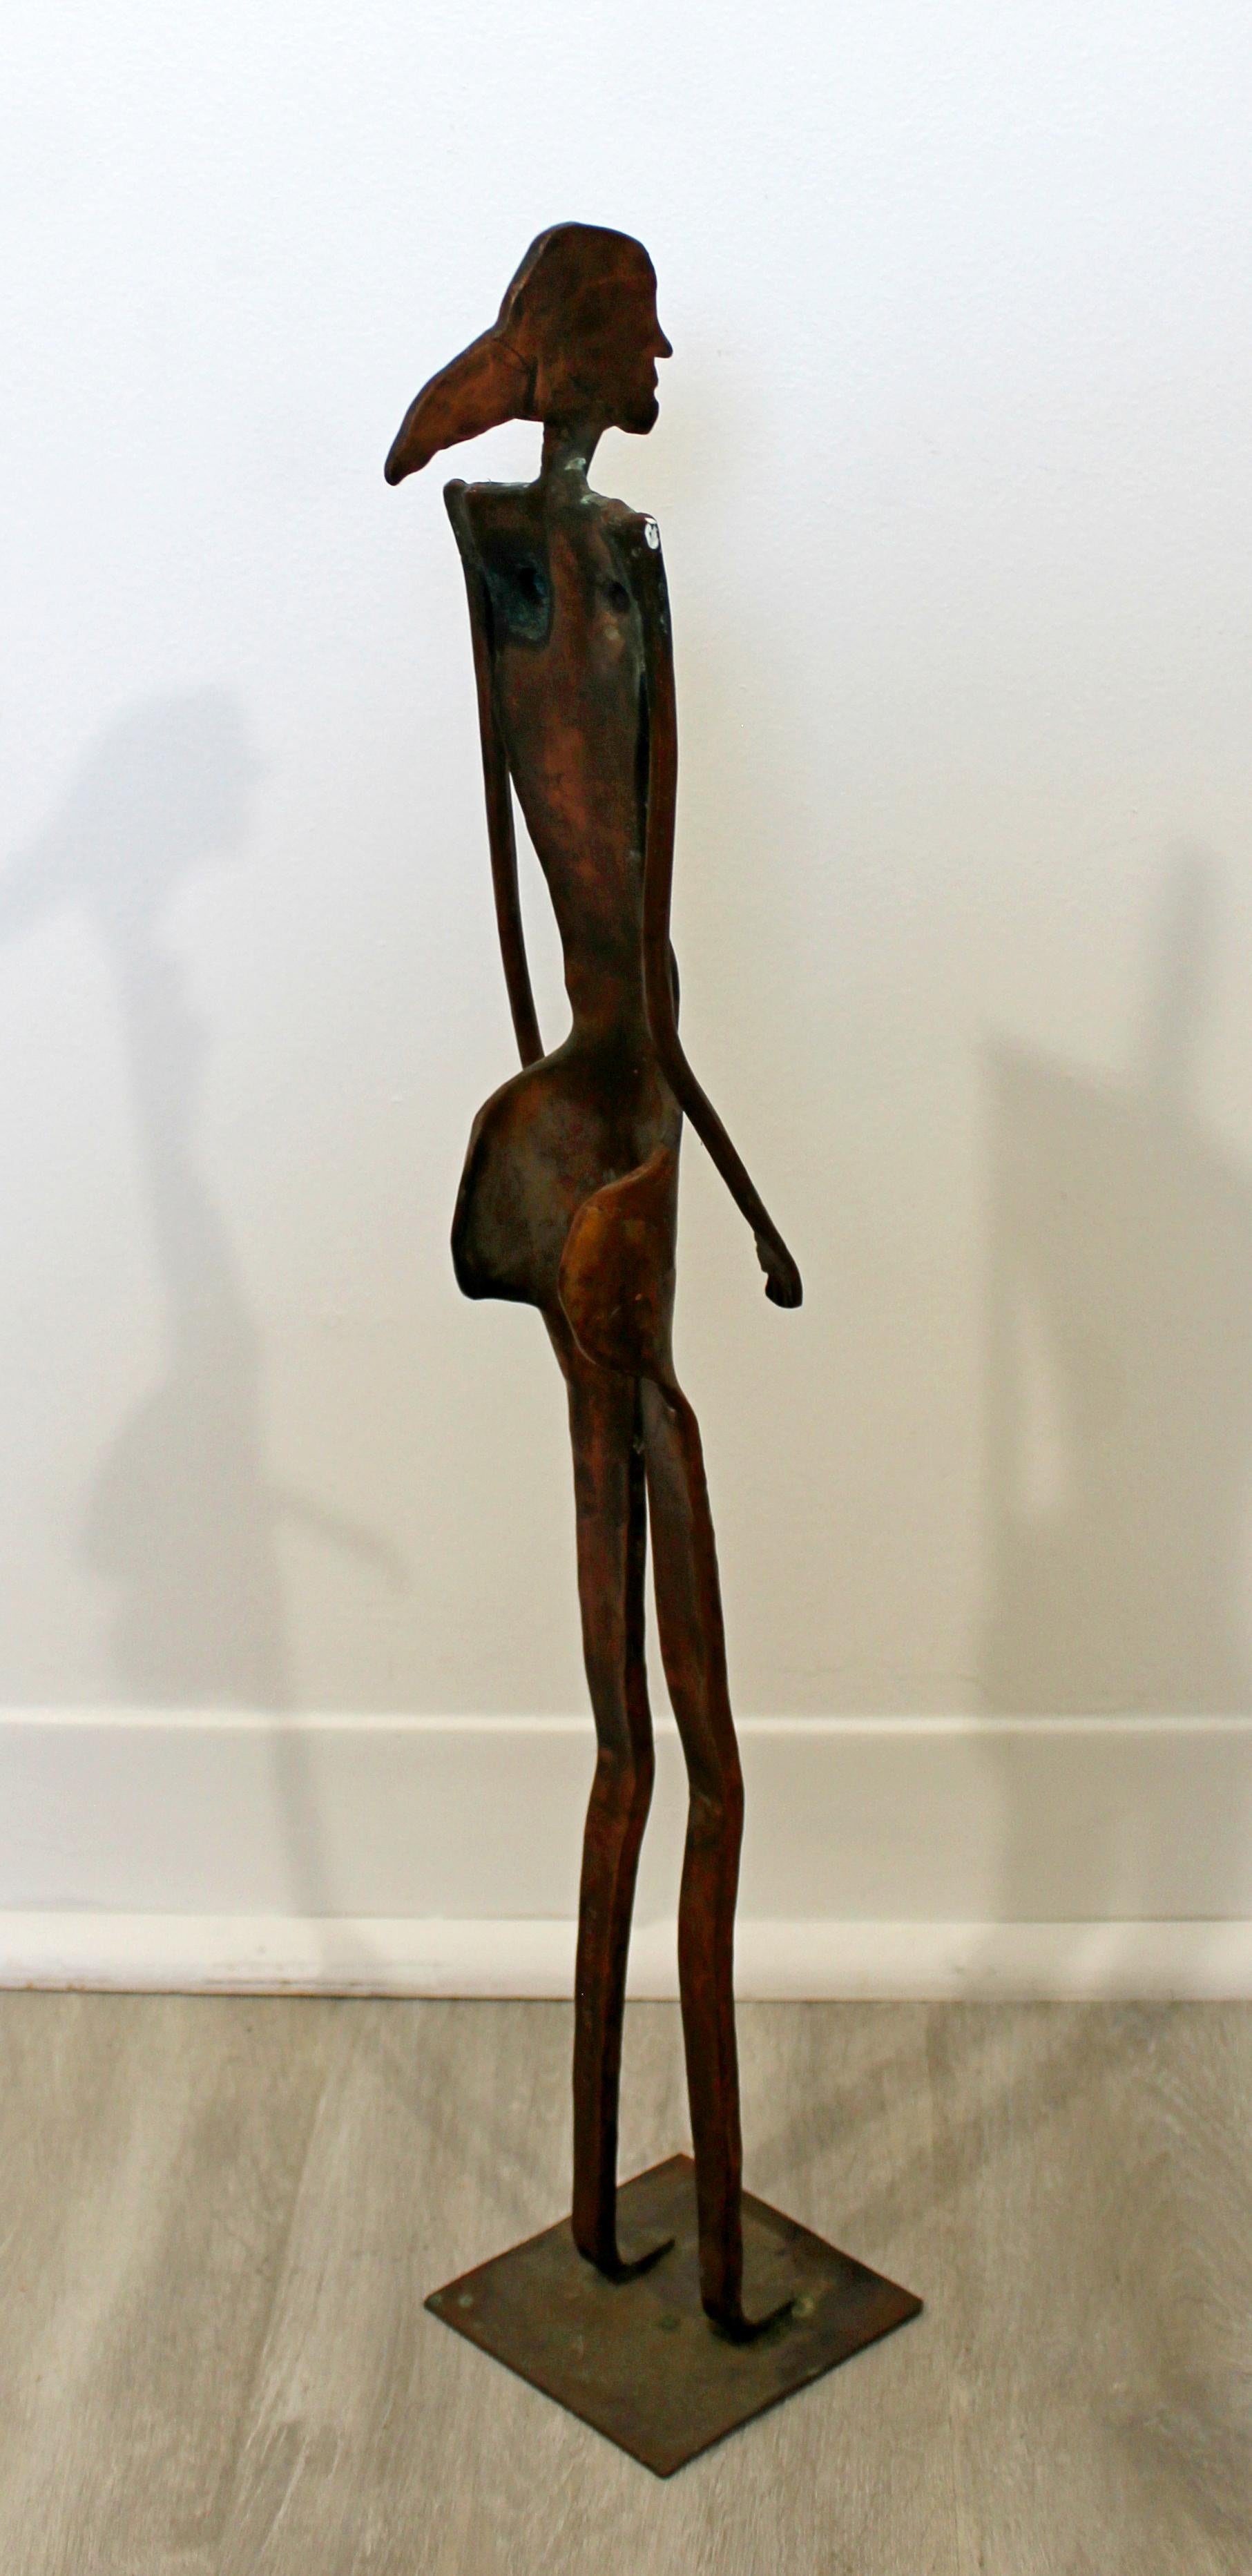 Contemporary Forged Copper Female Nude Figure Table Sculpture Signed Hansen 2001 In Good Condition For Sale In Keego Harbor, MI